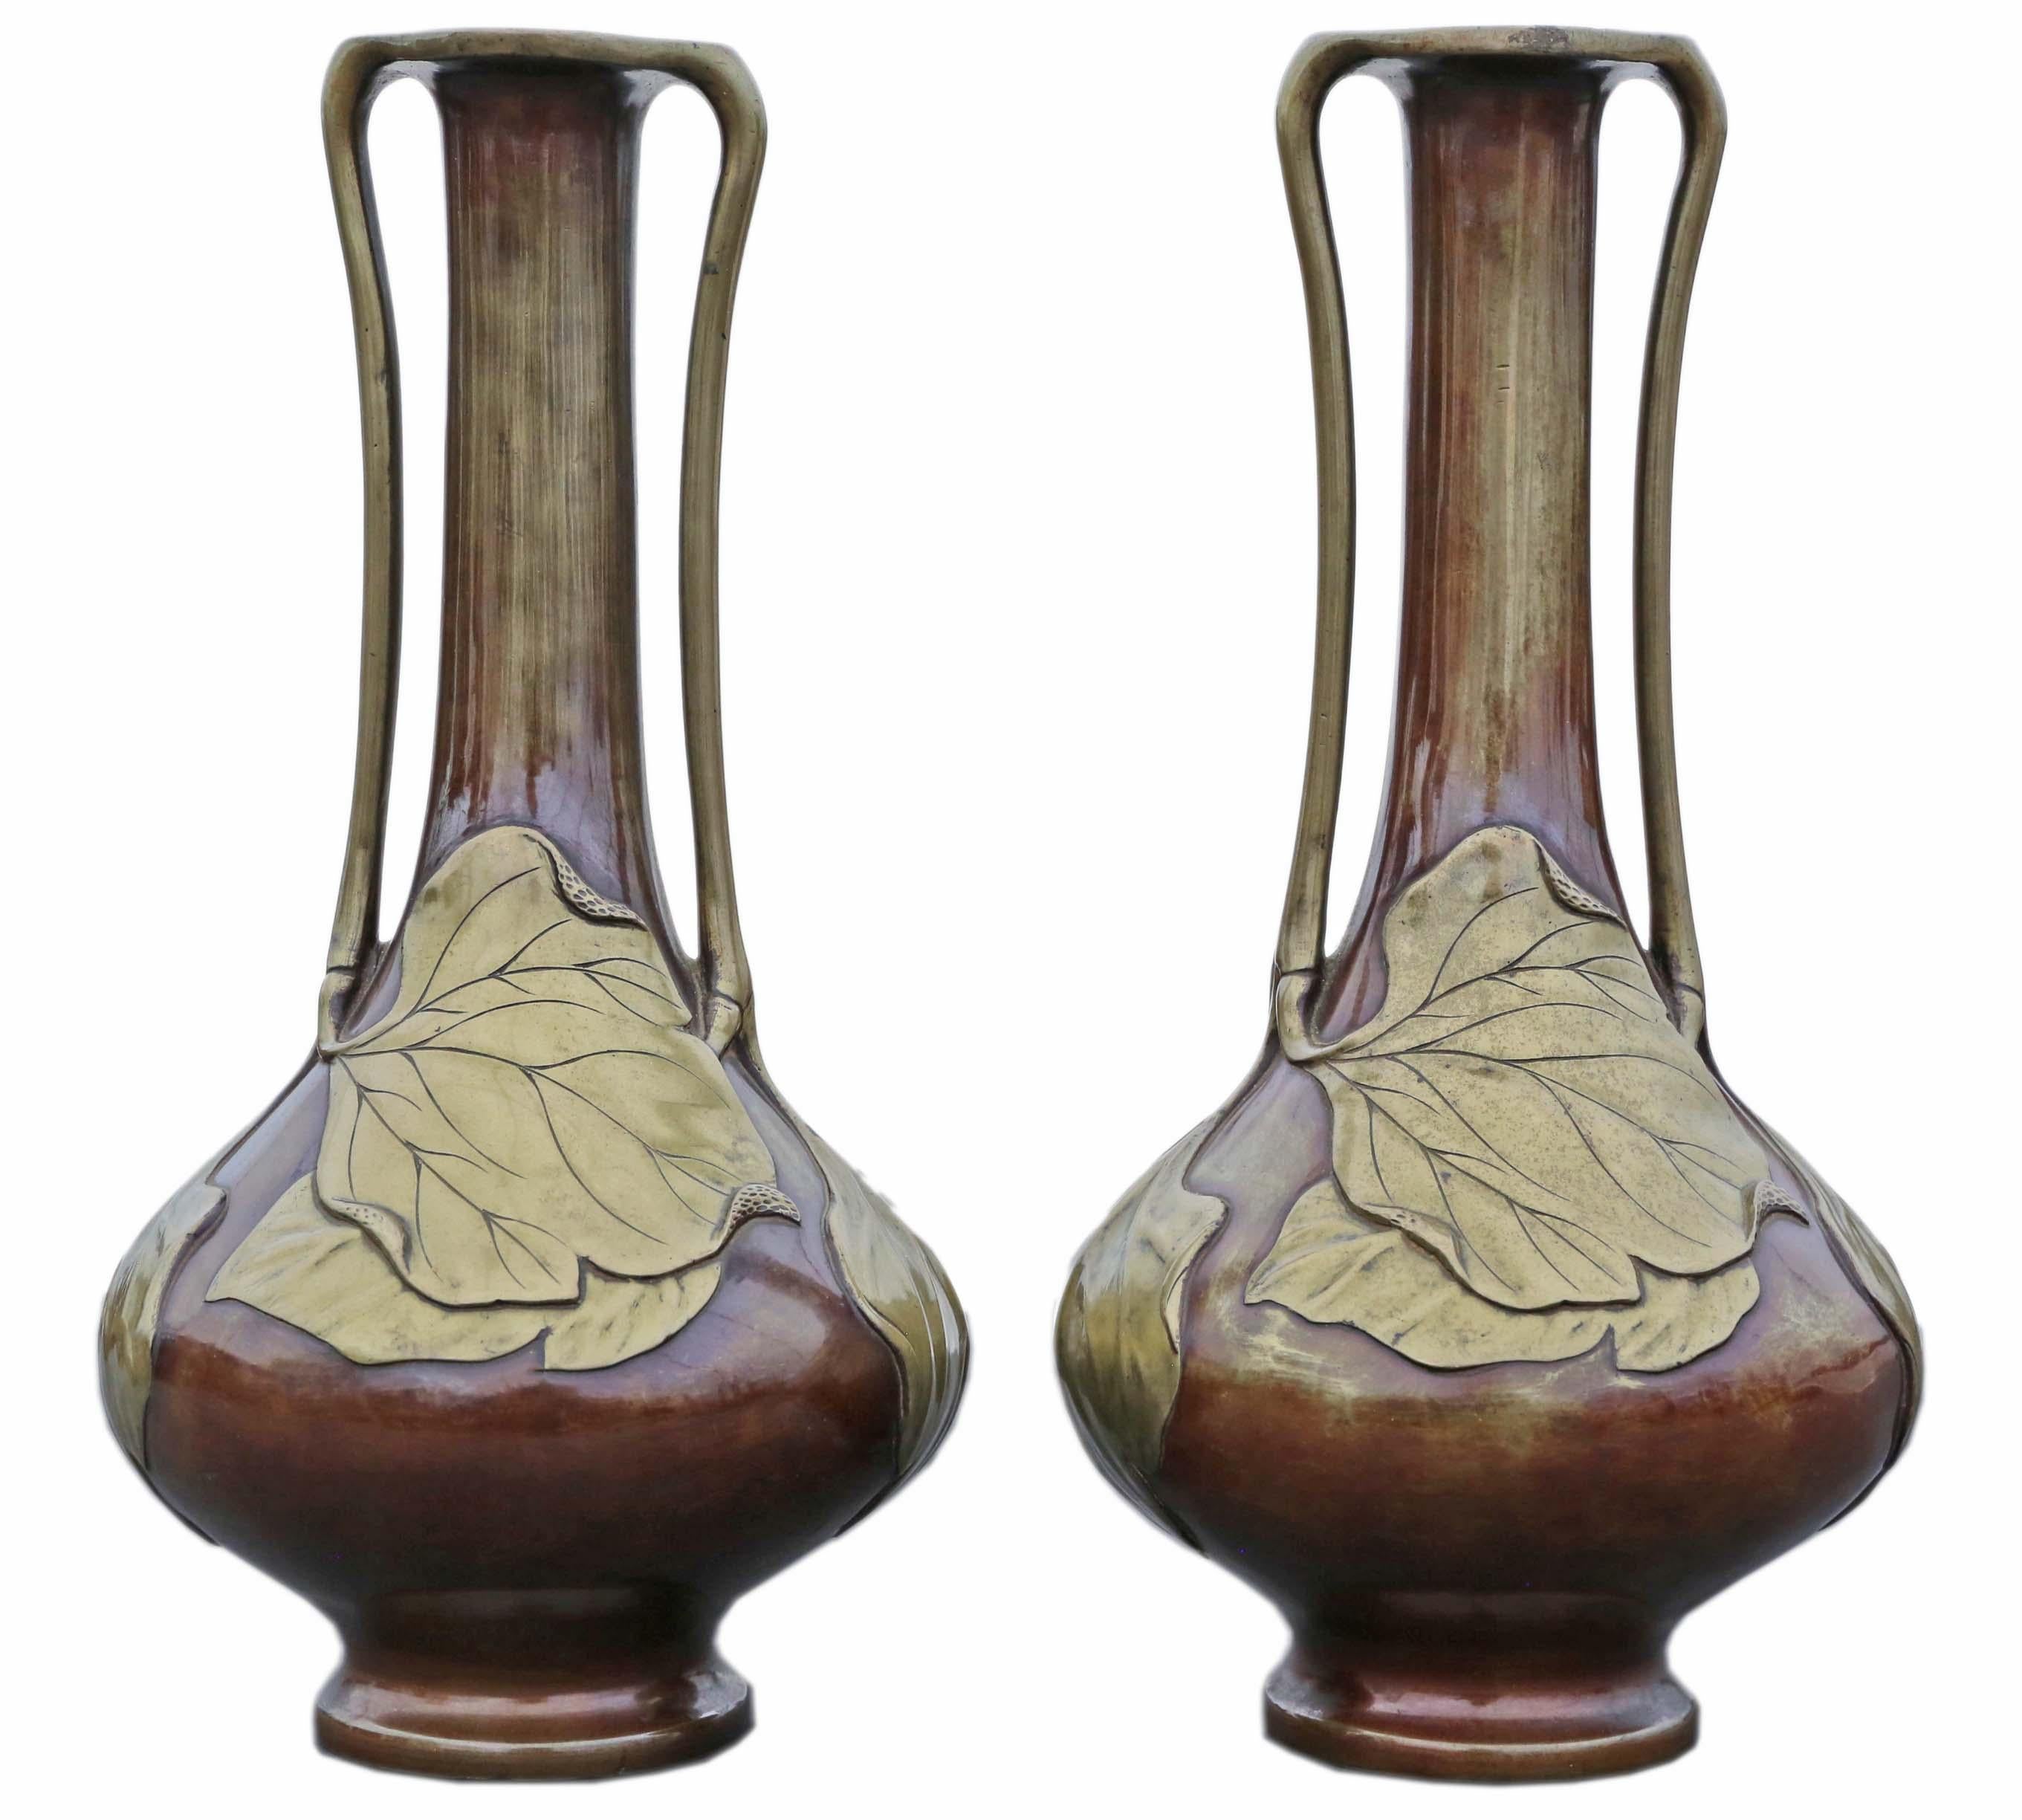 Antique Large Pair of Japanese Bronze Mixed Metal Vases - Exquisite Meiji Period Artist Pieces!

These stunning Japanese bronze mixed metal vases, dating back to the Meiji Period circa 1910, are exceptional examples of artistic craftsmanship. Each